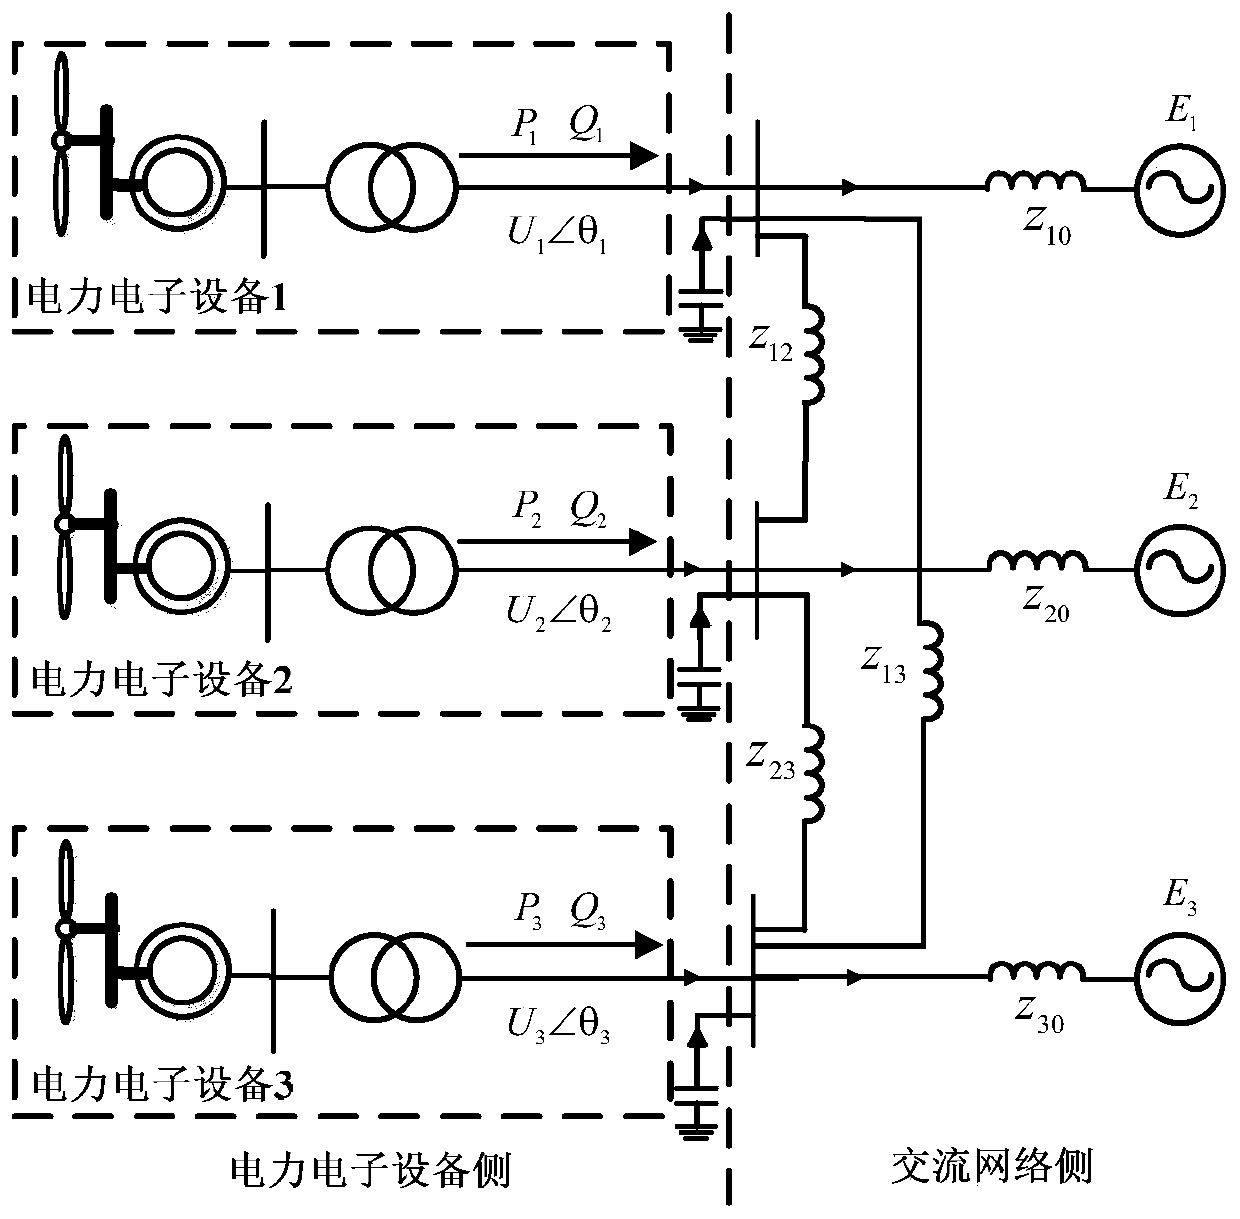 A calculation method for grid-connected capacity limit of wind power multi-infeed power system